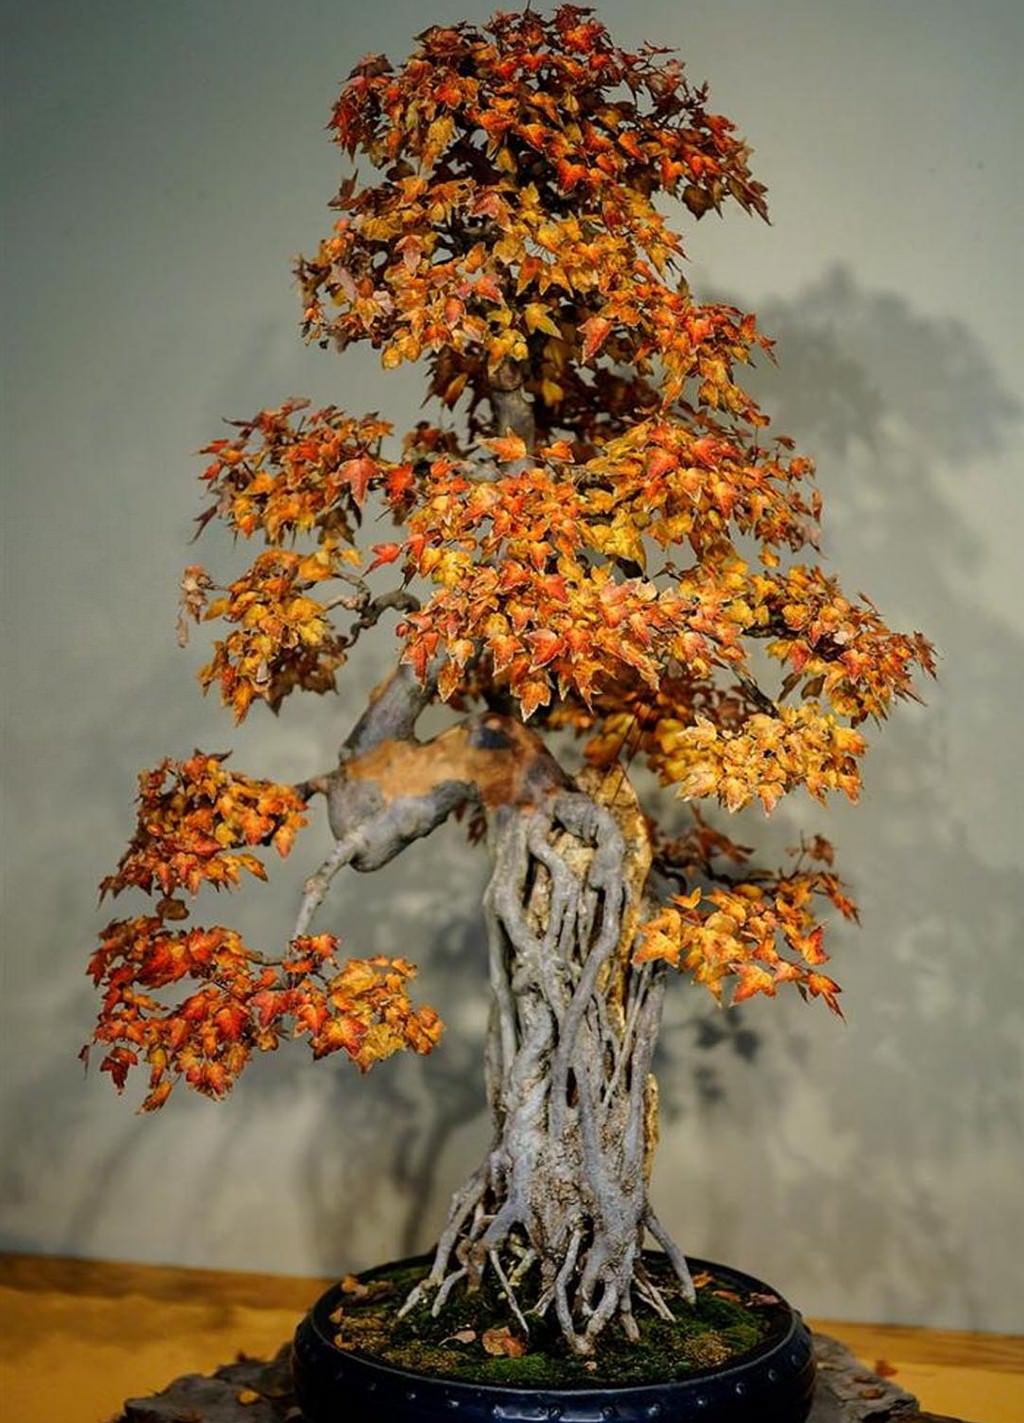 20 Brilliant Bonsai Trees You Have To See